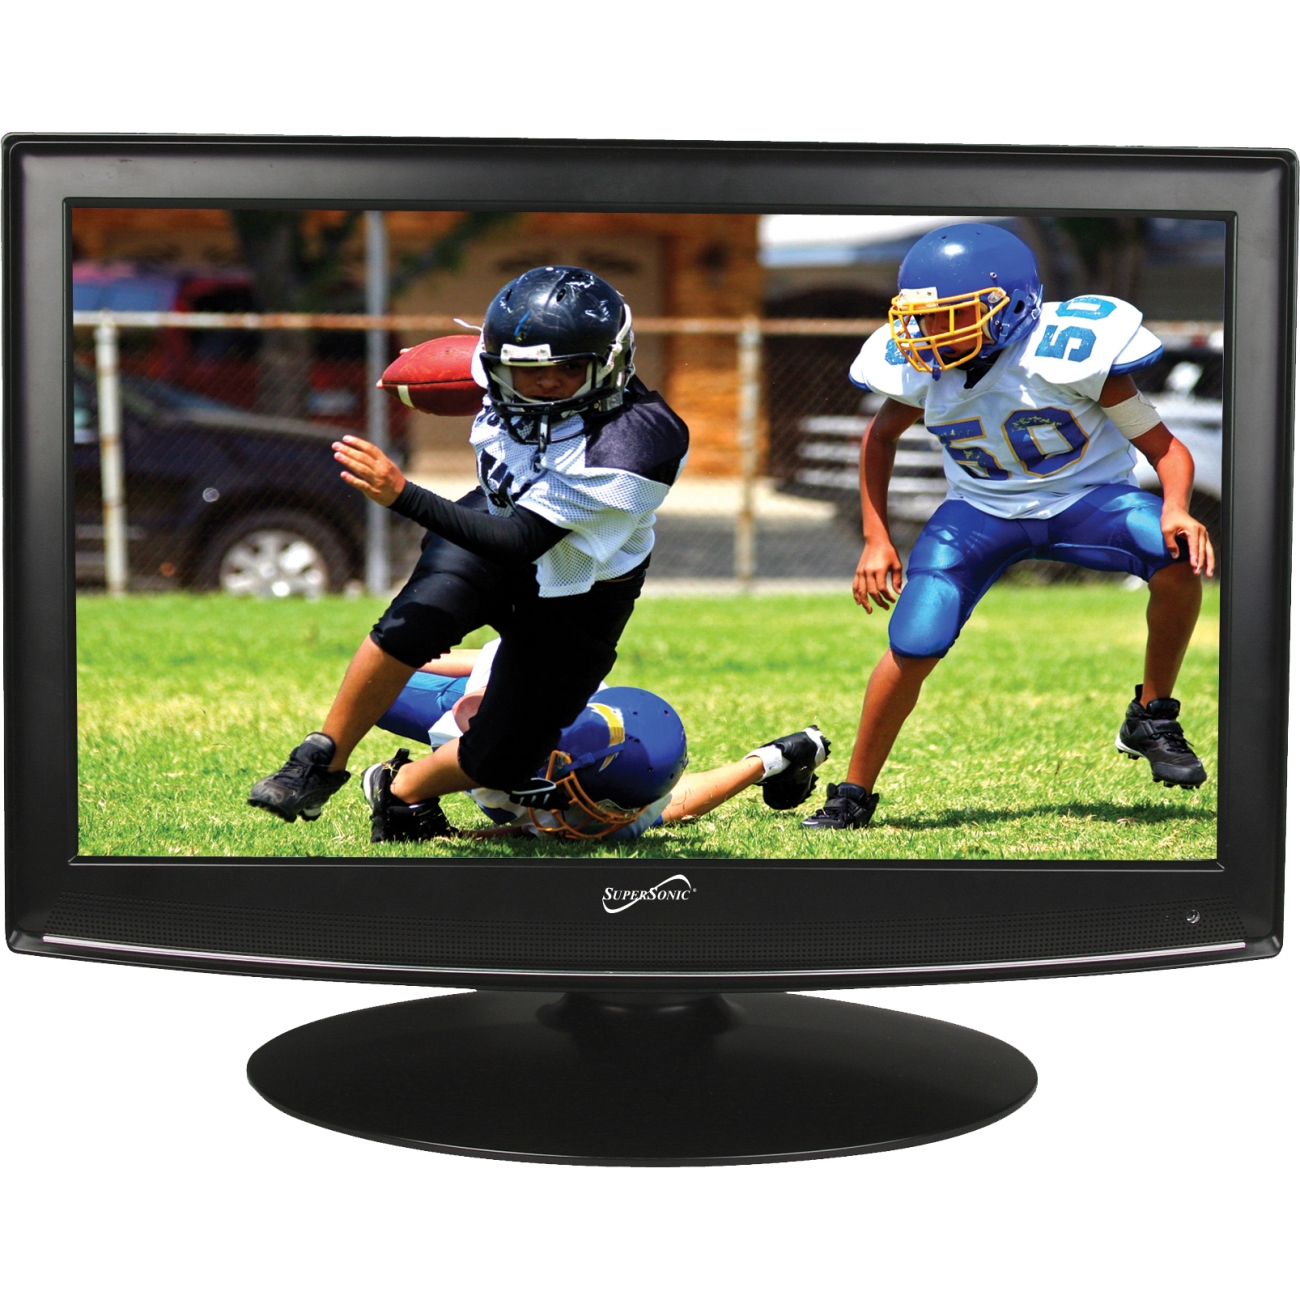 SUPERSONIC Supersonic 13.3" 720p Widescreen Digital TFT LCD HDTV SC 1331 